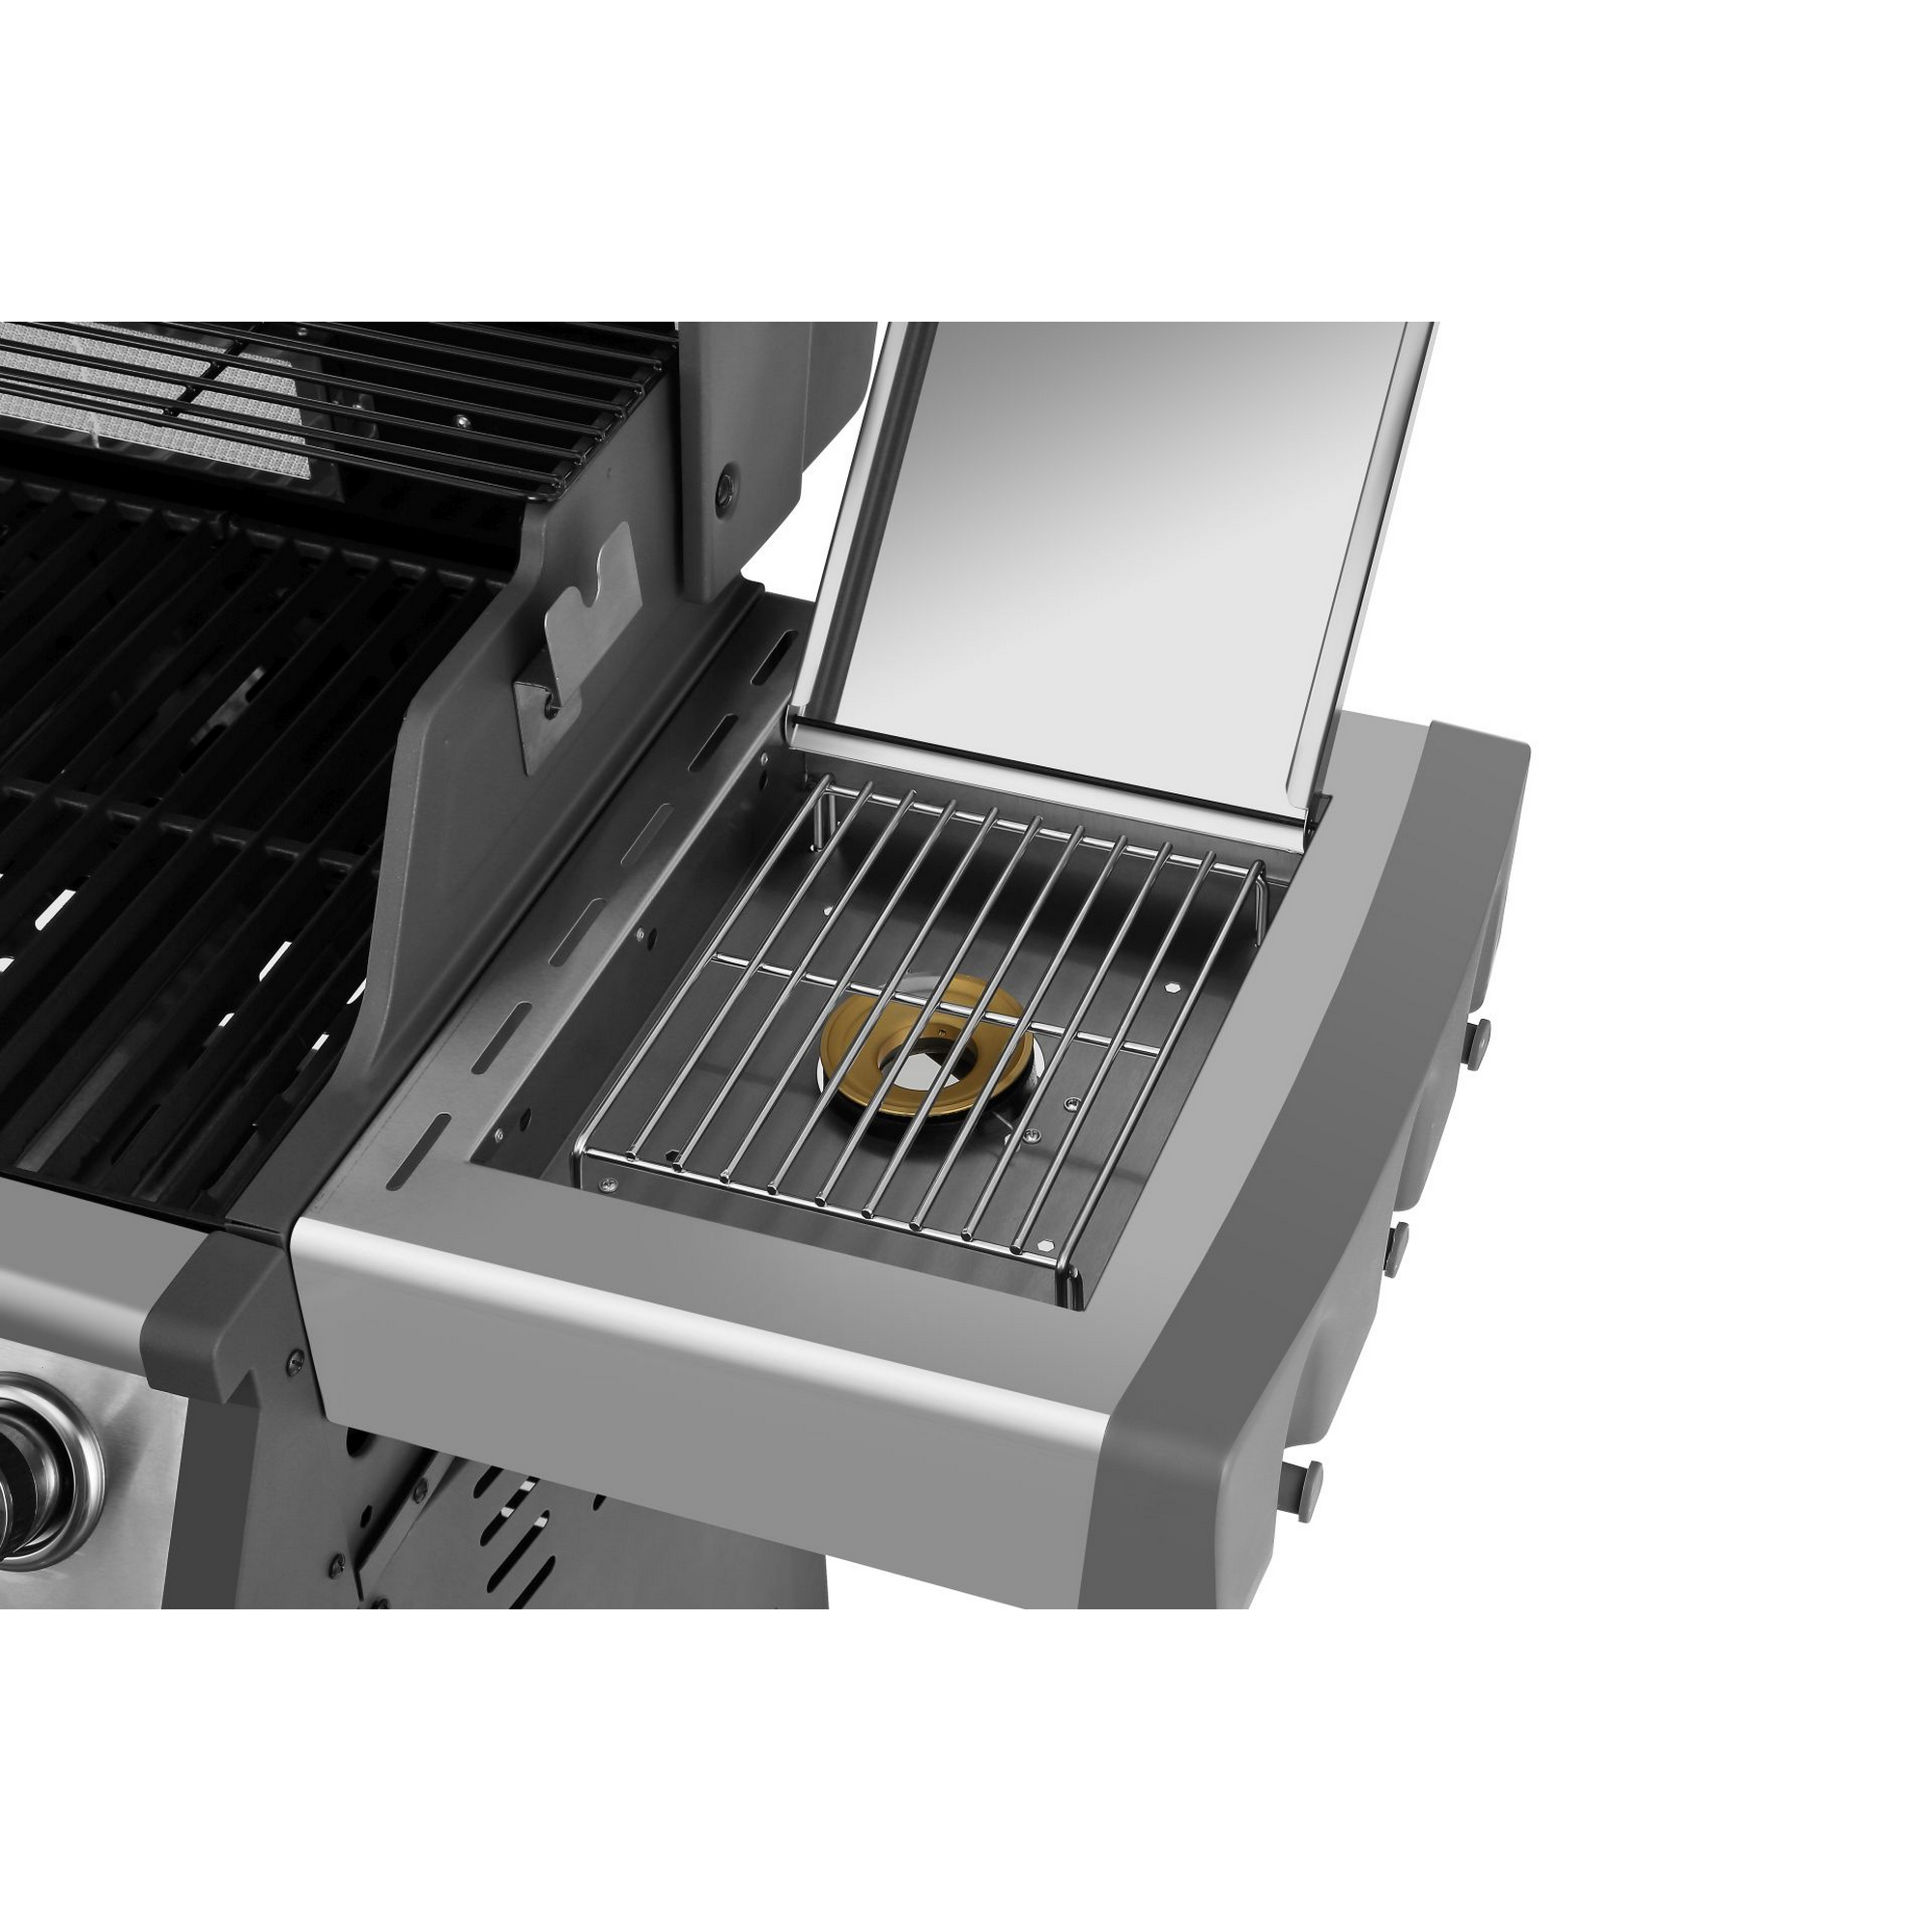 Gasgrill 'Concord' silber 131 x 139 x 58 cm + product picture